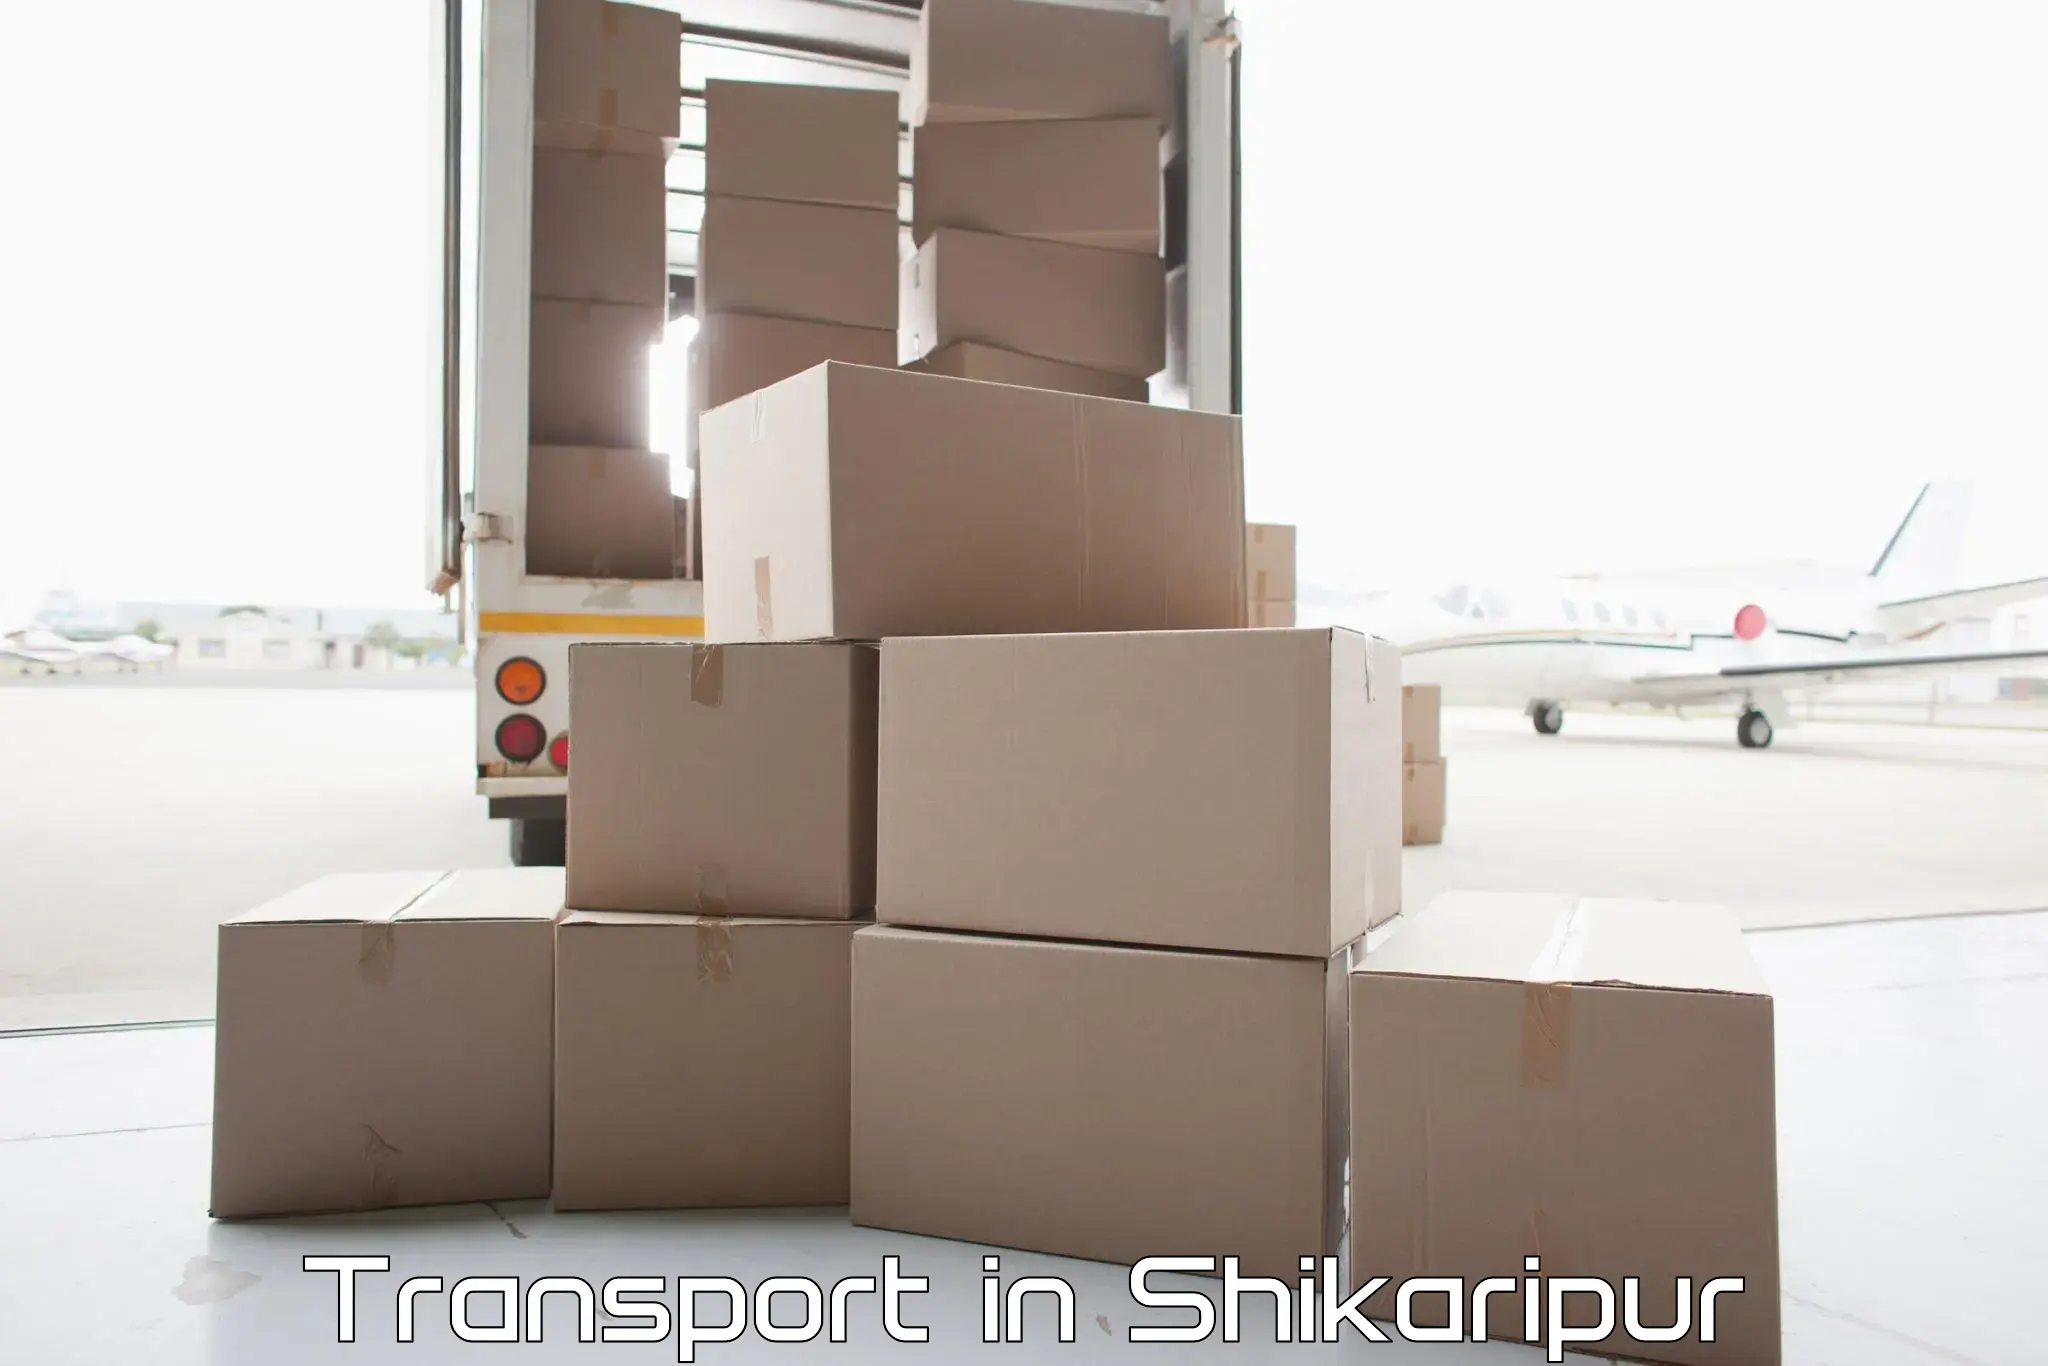 Shipping services in Shikaripur